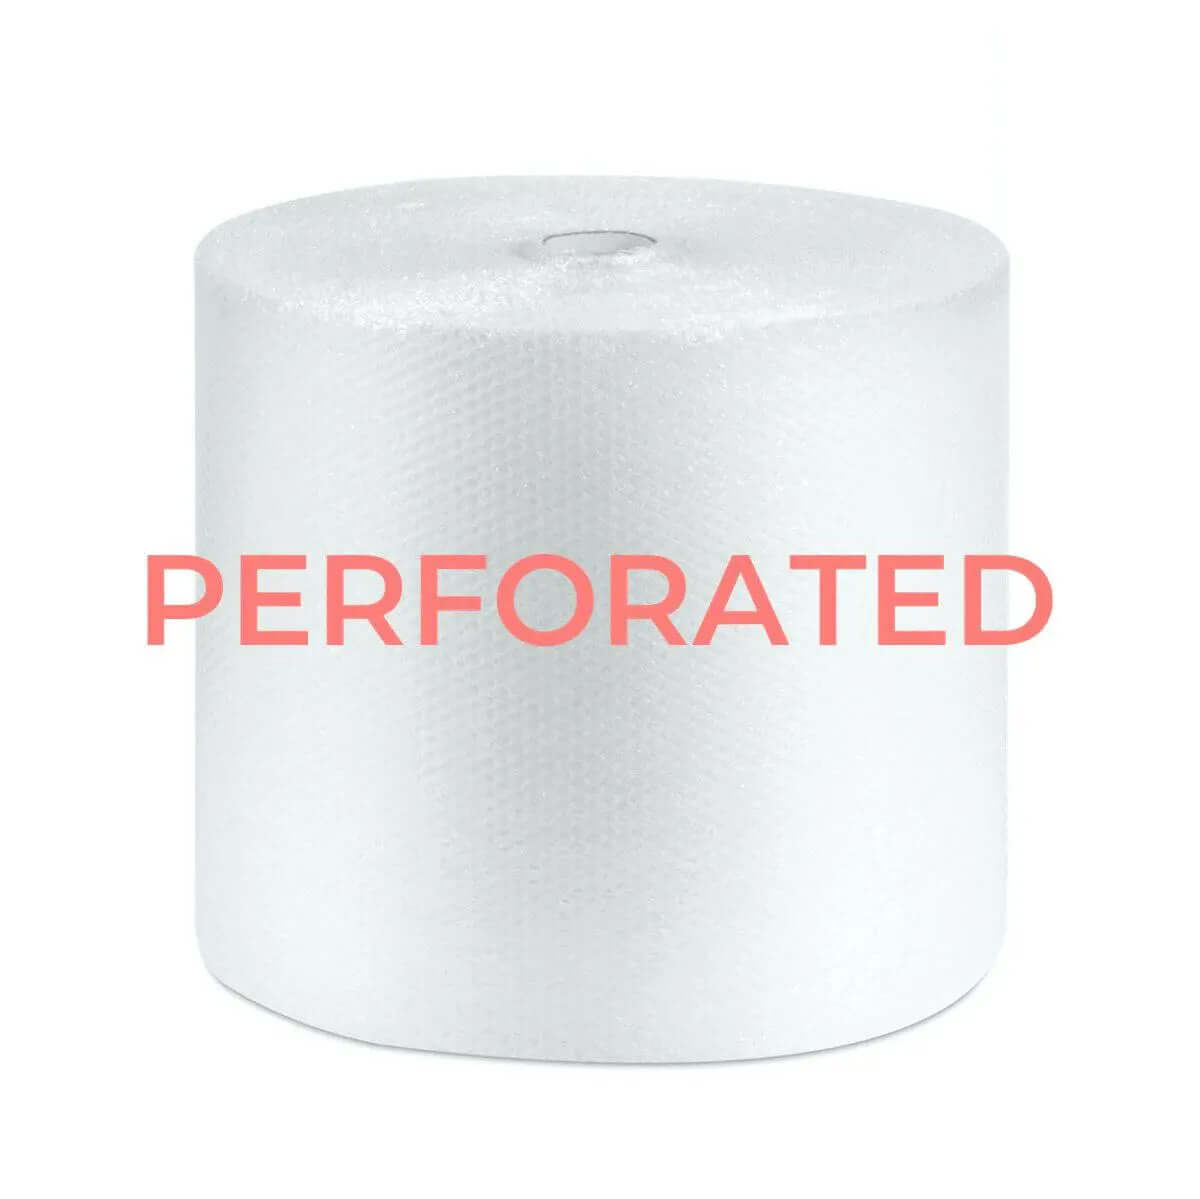 Perforated Bubble Wrap Roll - 375mm x 50m   Bubble Wrap Packstore Australia Packstore